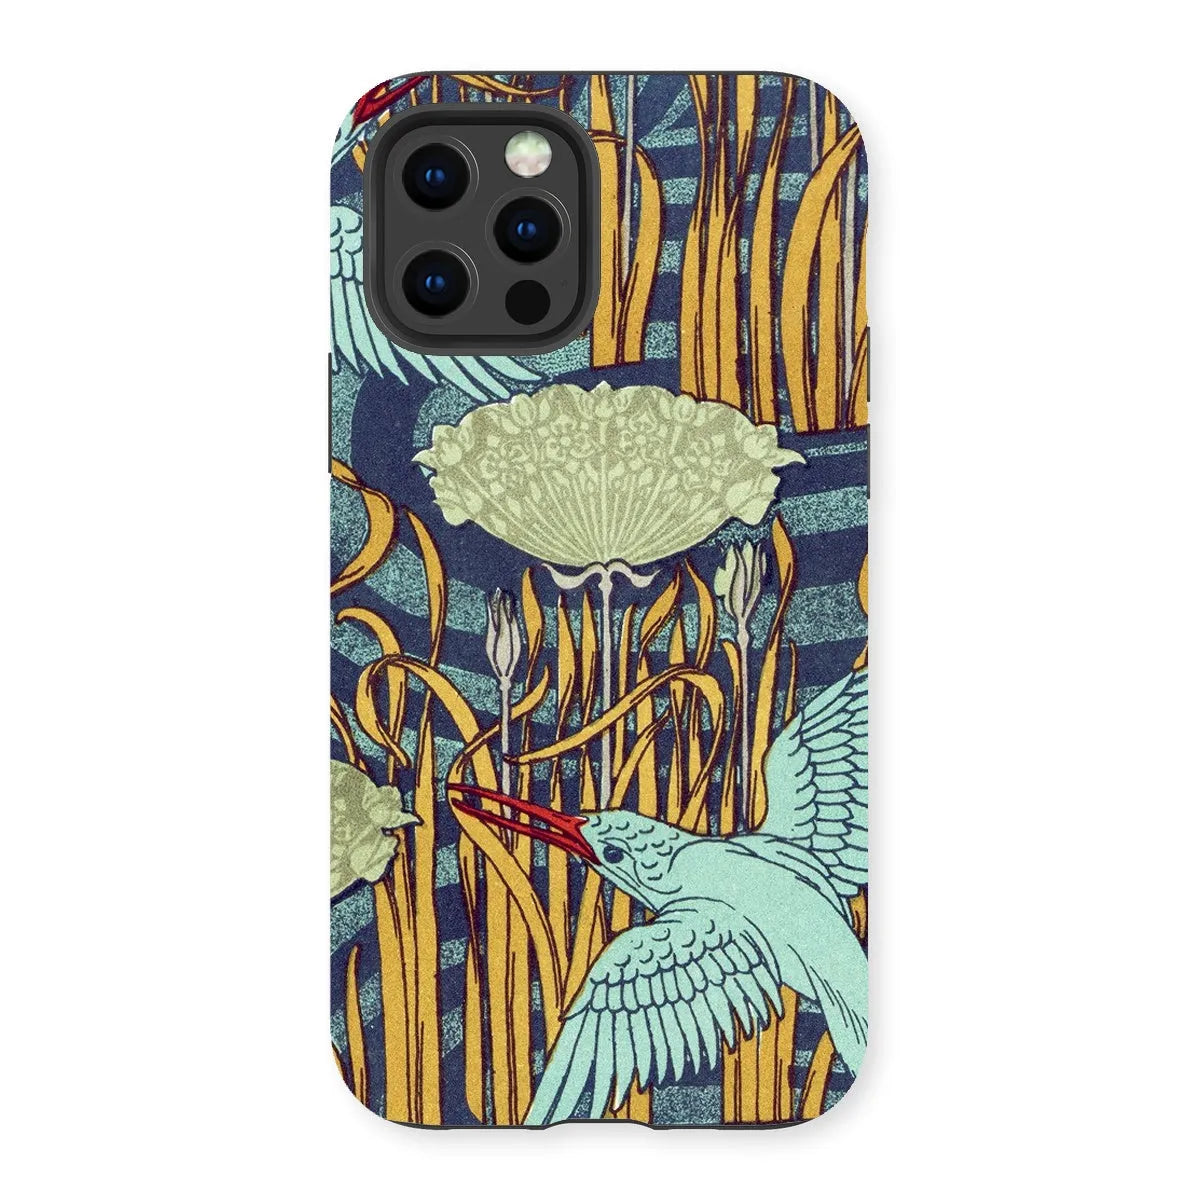 Kingfishers French Art Phone Case - Maurice Pillard Verneuil - Iphone 13 Pro / Matte - Mobile Phone Cases - Aesthetic